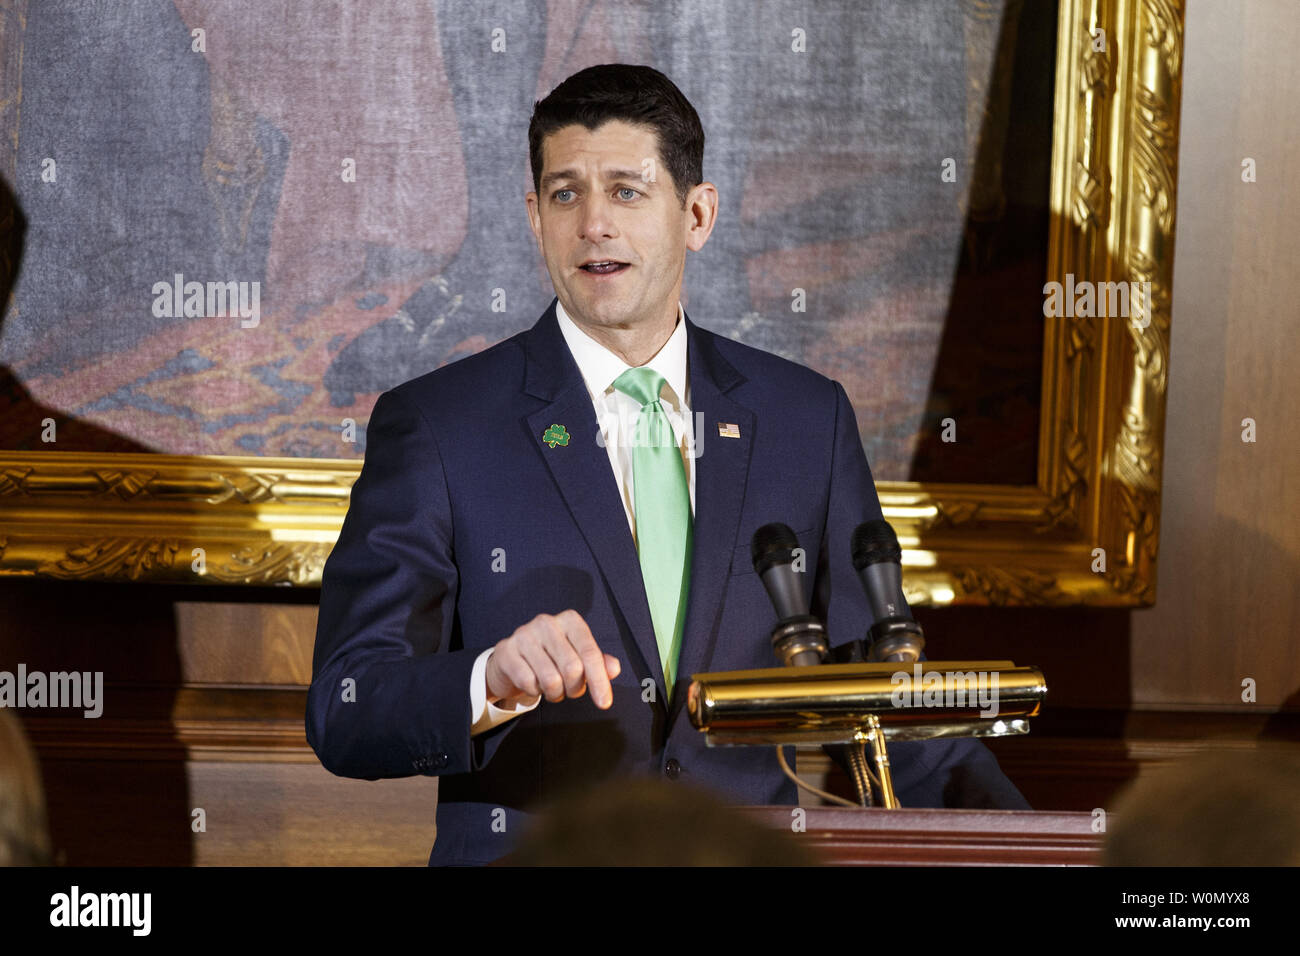 United States Speaker of the House of Representatives Paul Ryan, Republican of Wisconsin, speaks at the Friends of Ireland luncheon at the United States Capitol in Washington, D.C. on March 15, 2018. Photo by Alex Edelman/UPI Stock Photo